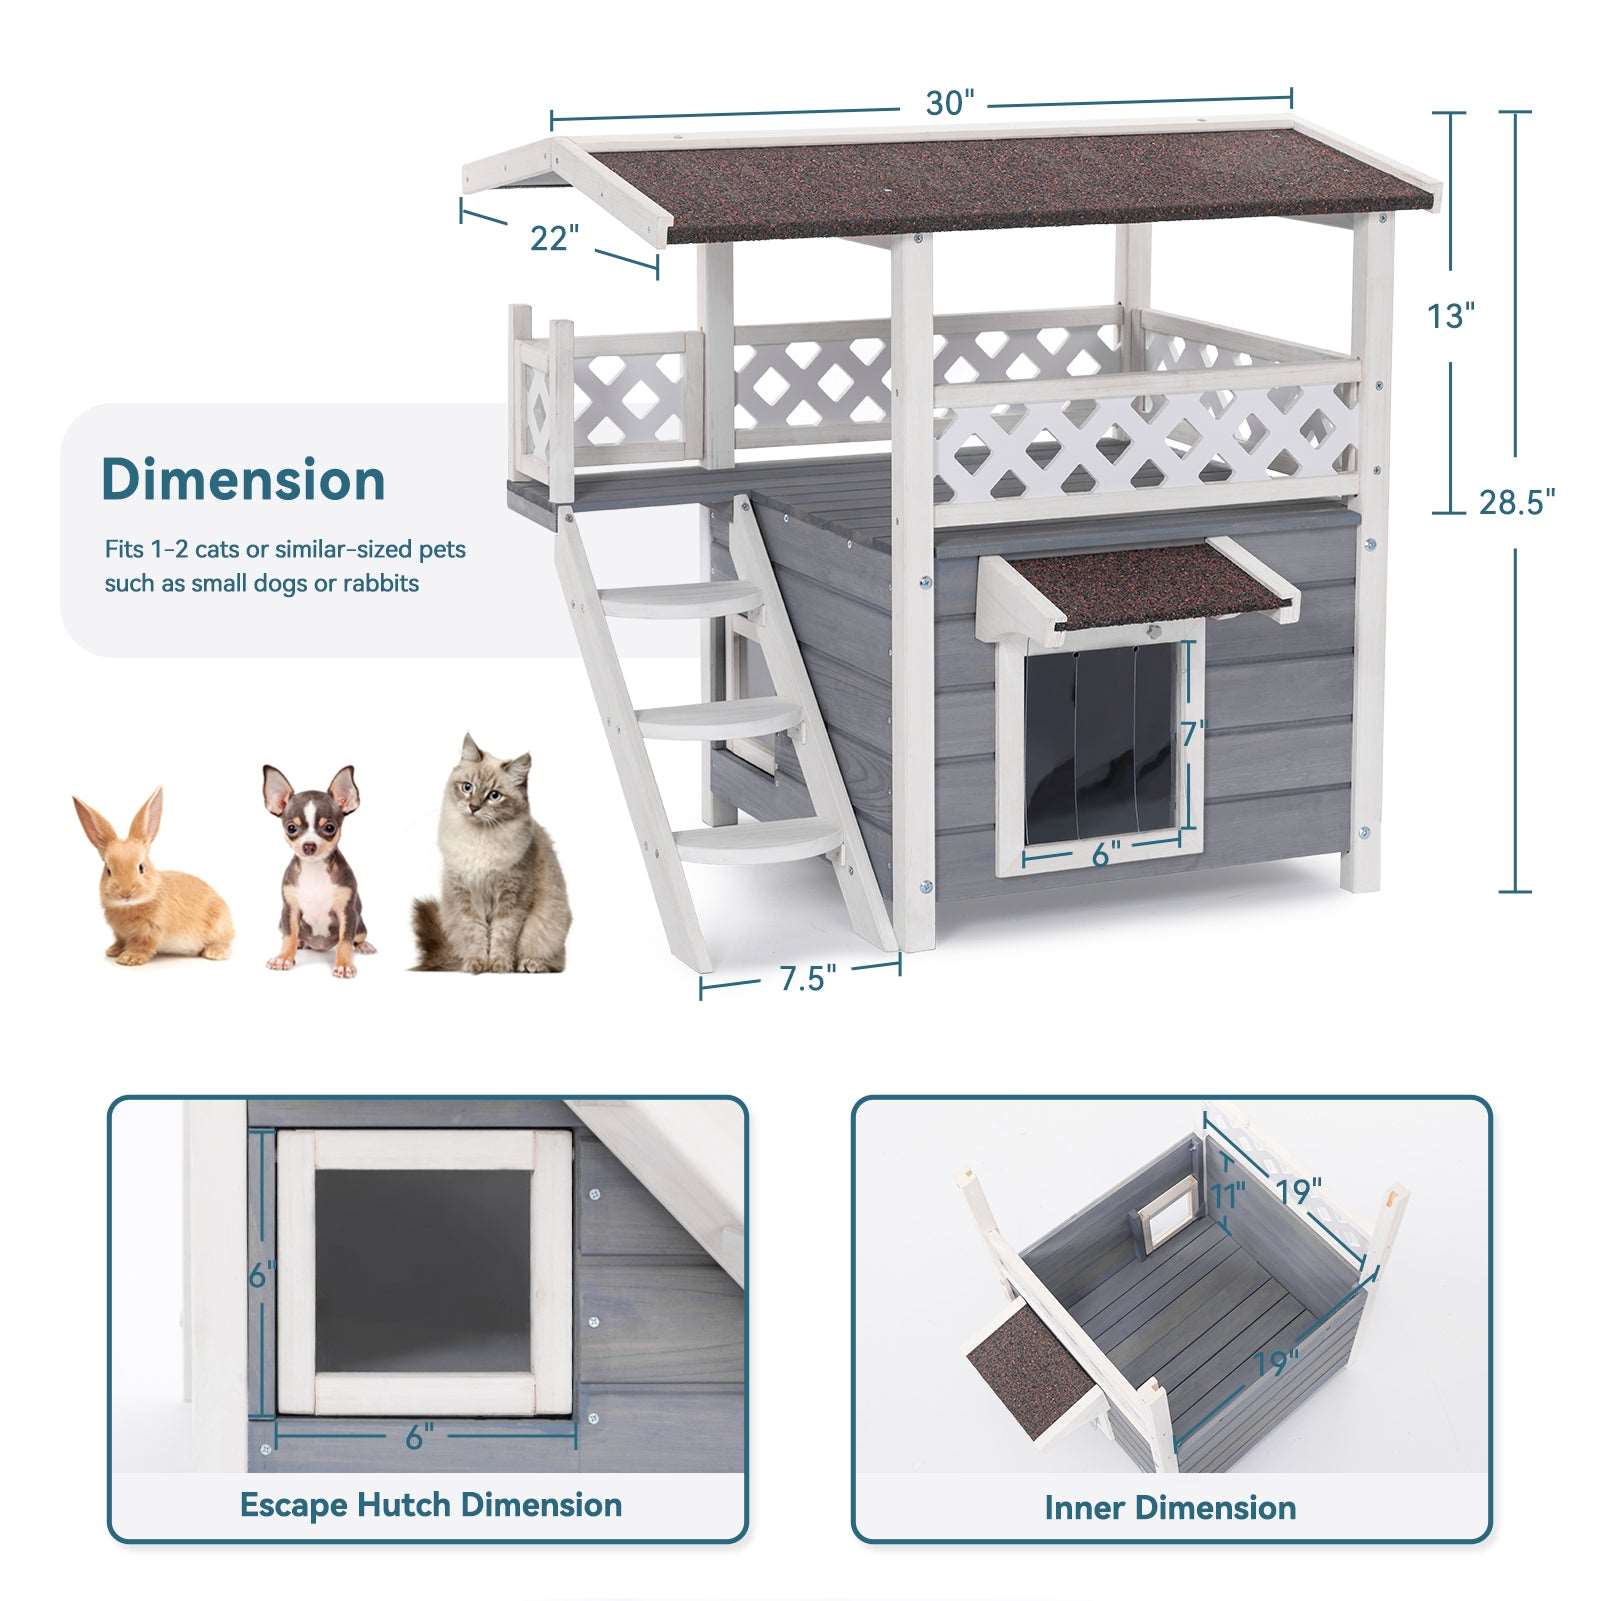 Petsfit-Cat-House-for-Outdoor-Feral-Cat-Shelter-for-1-2-Cats-09